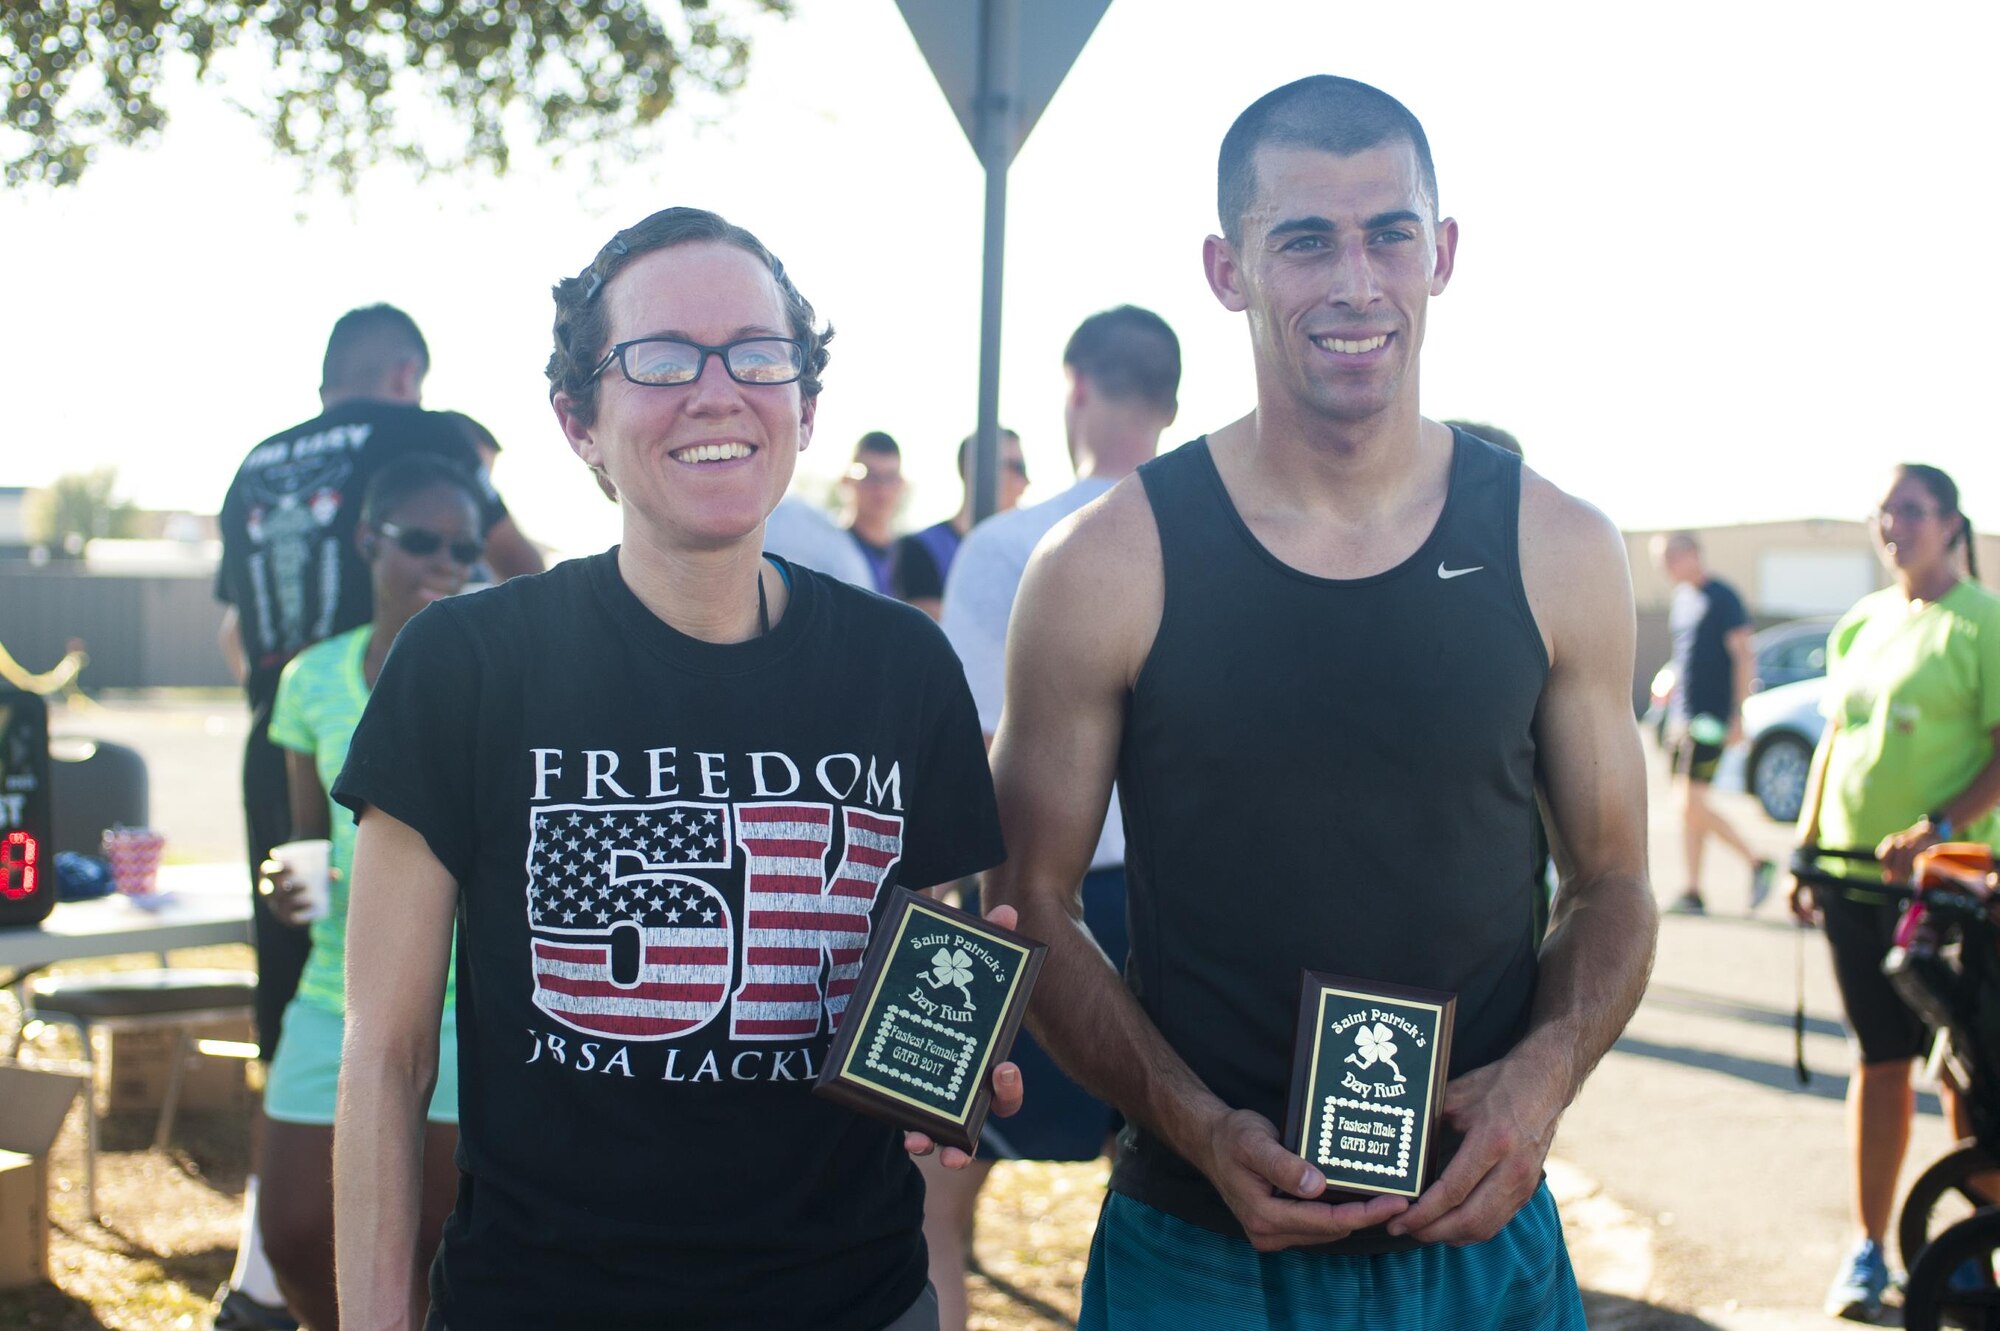 U.S. Air Force Airman 1st Class Bretta Jones, 316th Training Squadron student, and Airman 1st Class Jacob Bull, 312th Training Squadron student, show their trophies for winning the St. Patrick ‘s day fun-run on Goodfellow Air Force Base, Texas, March 17th, 2017. Bull trains in his off time for marathons. (U.S. Air Force photo by Senior Airman Scott Jackson/Released)